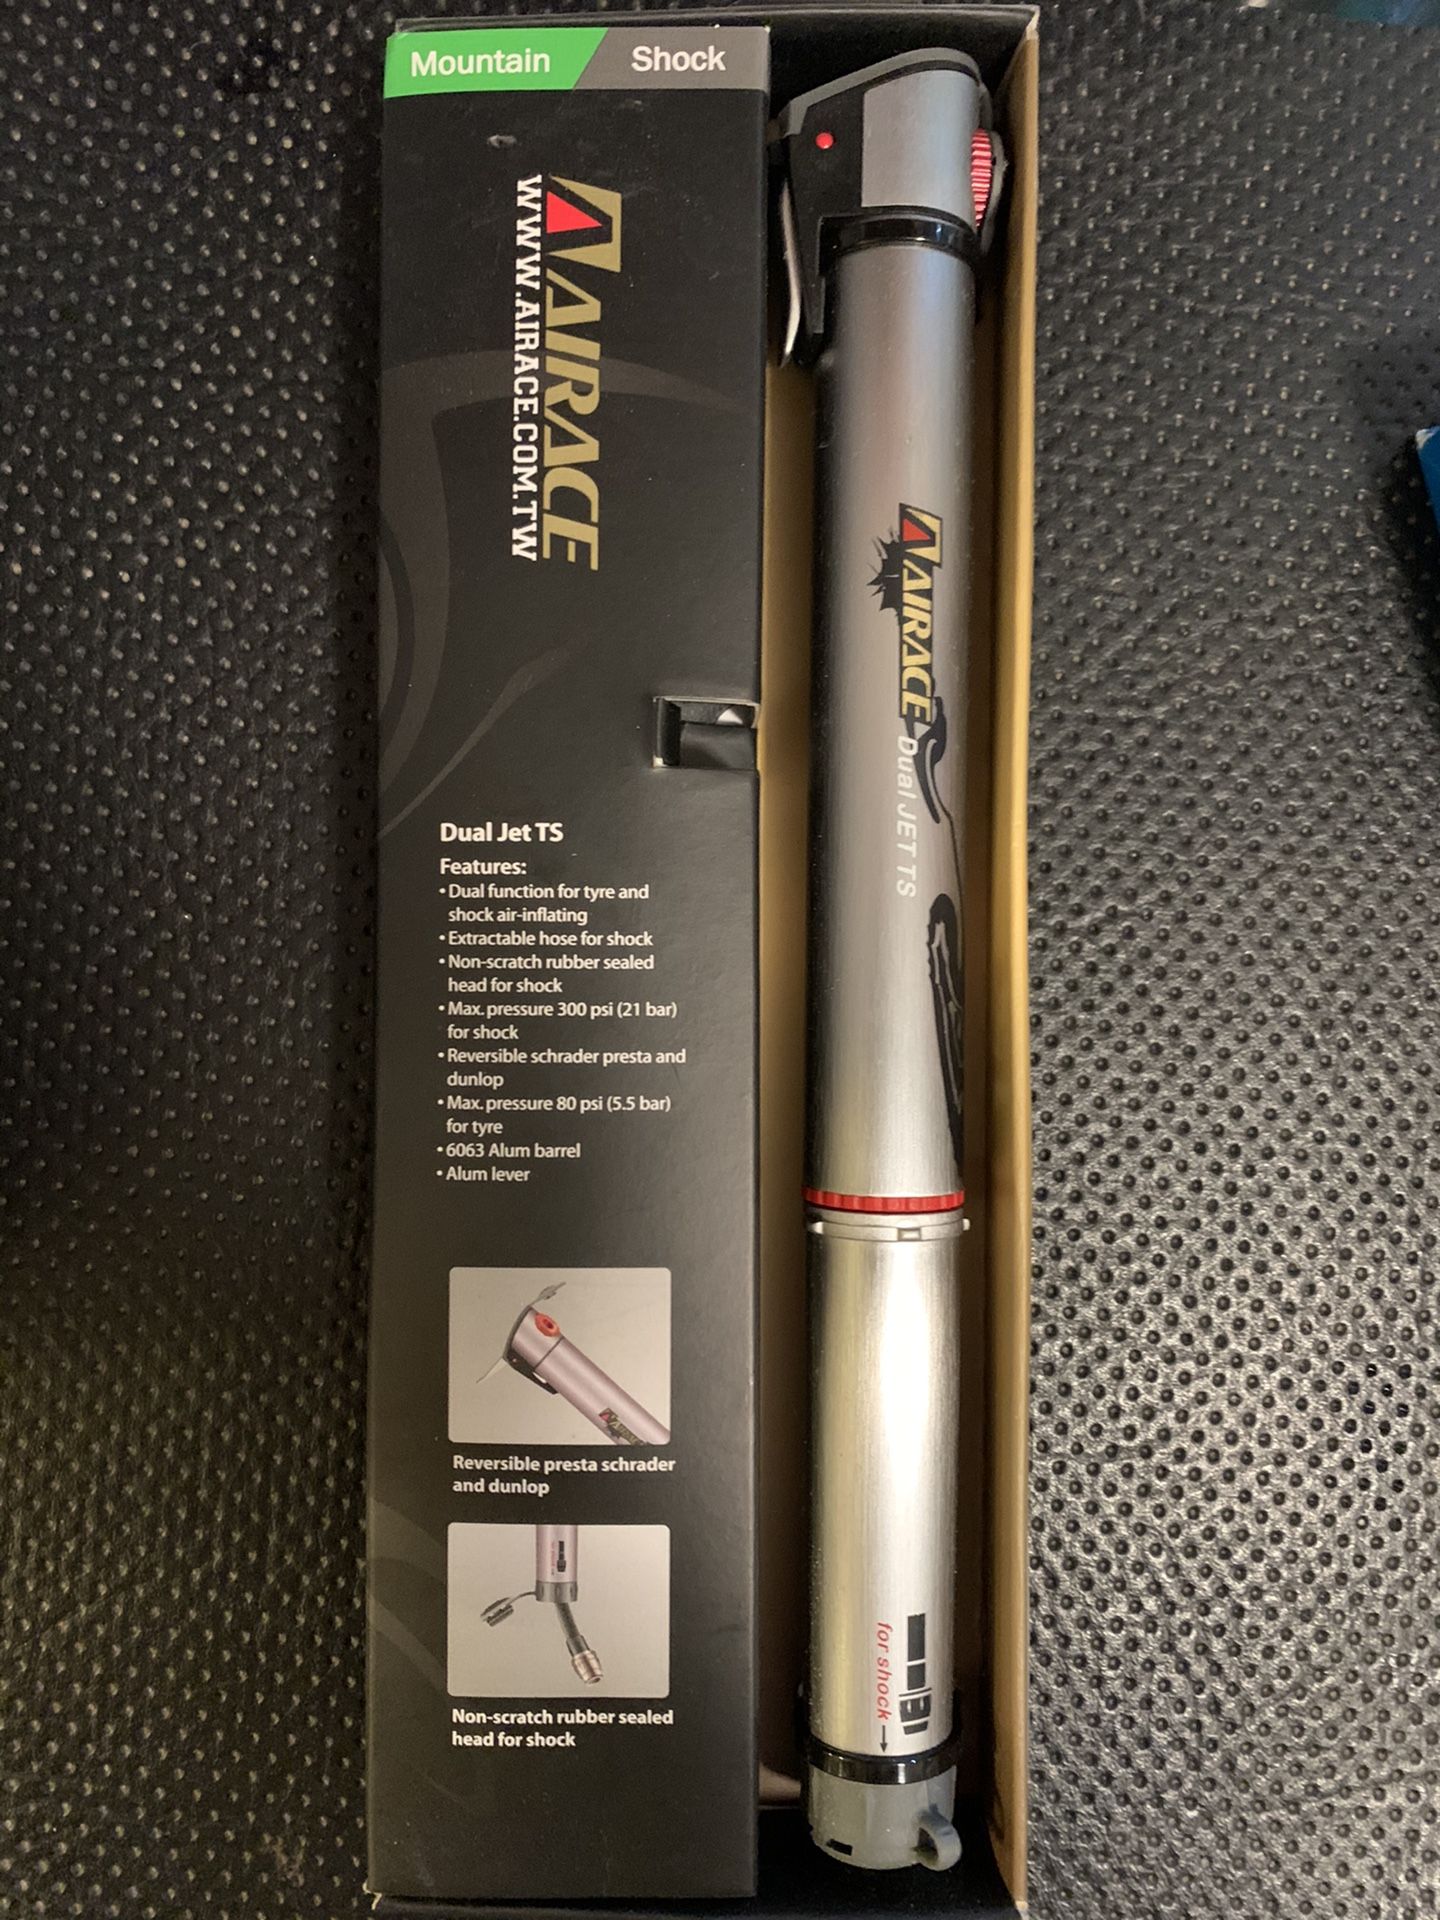 Airace dual jet ts bicycle and shock pump (new)